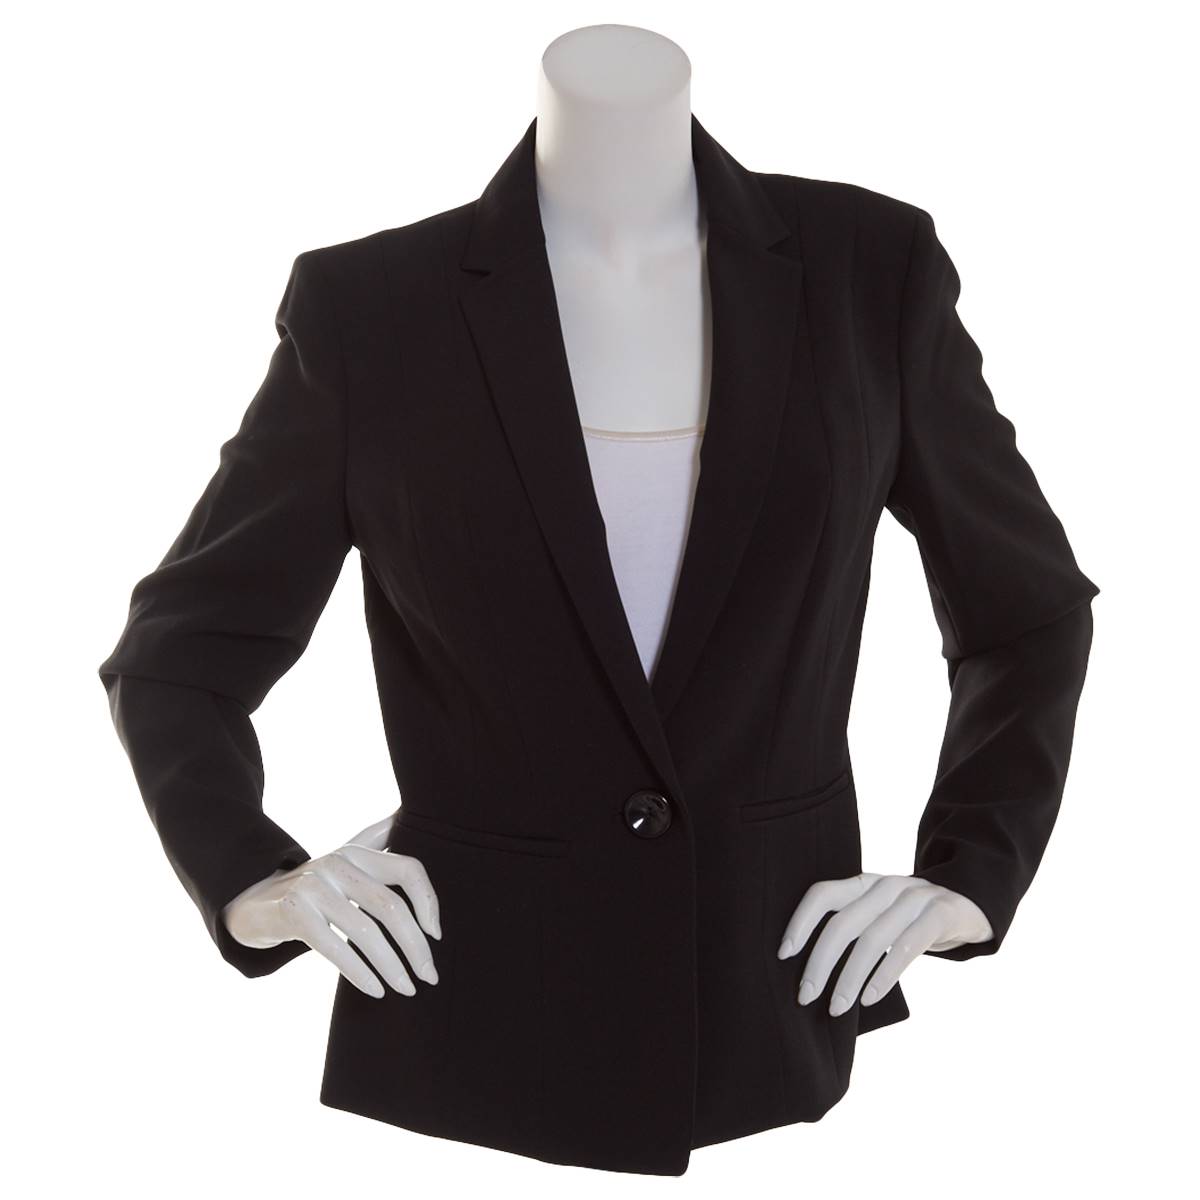 Womens Kasper One Button Seamed Suit Separates Jacket